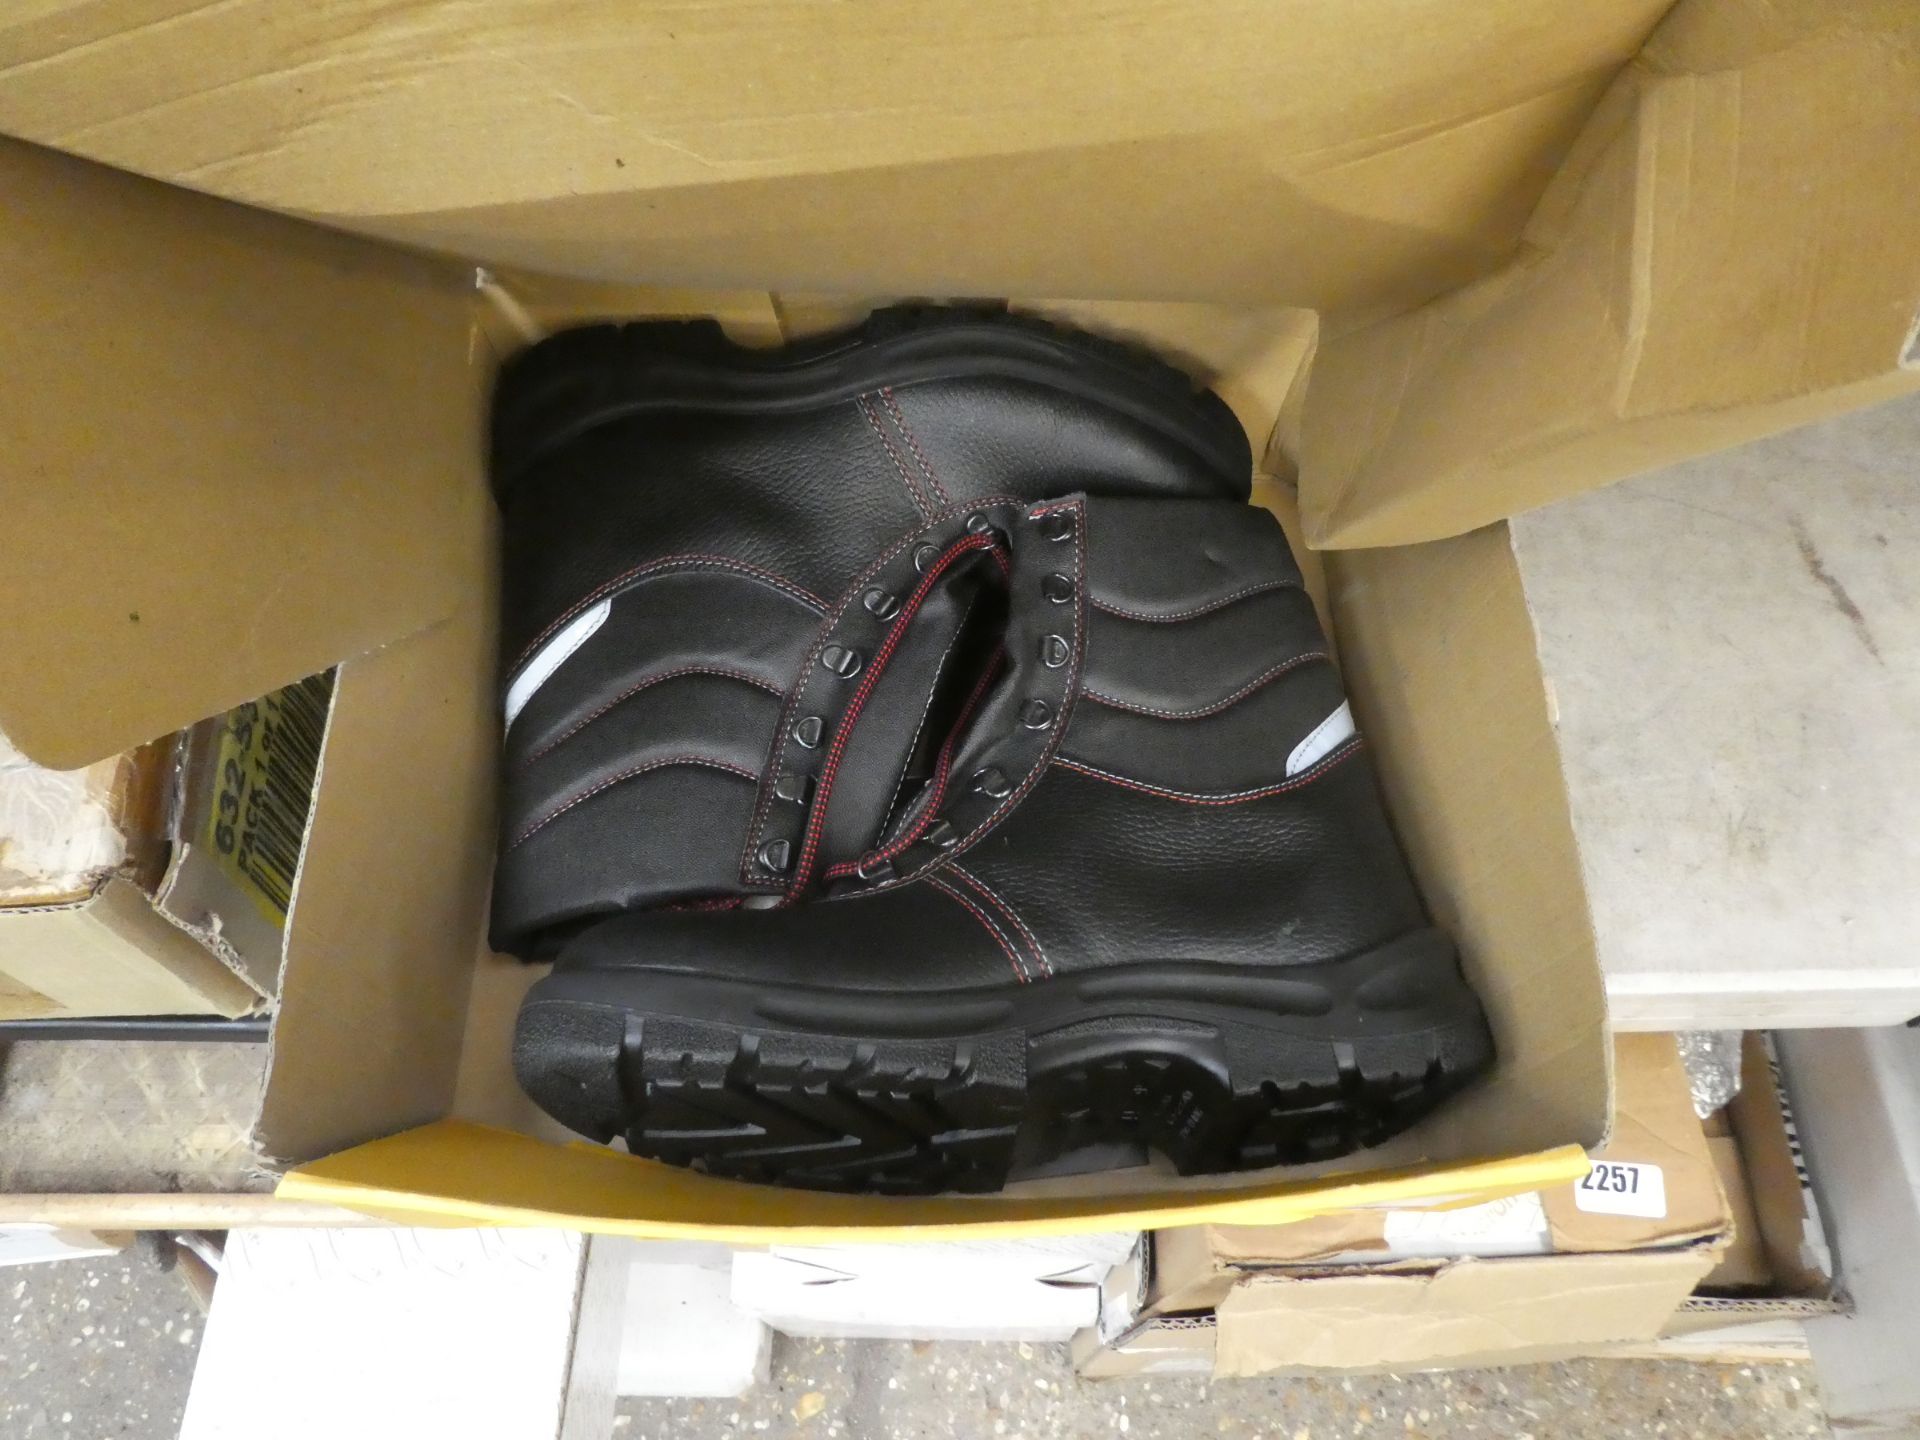 Pair of Panda safety work boots with box, size 9.5